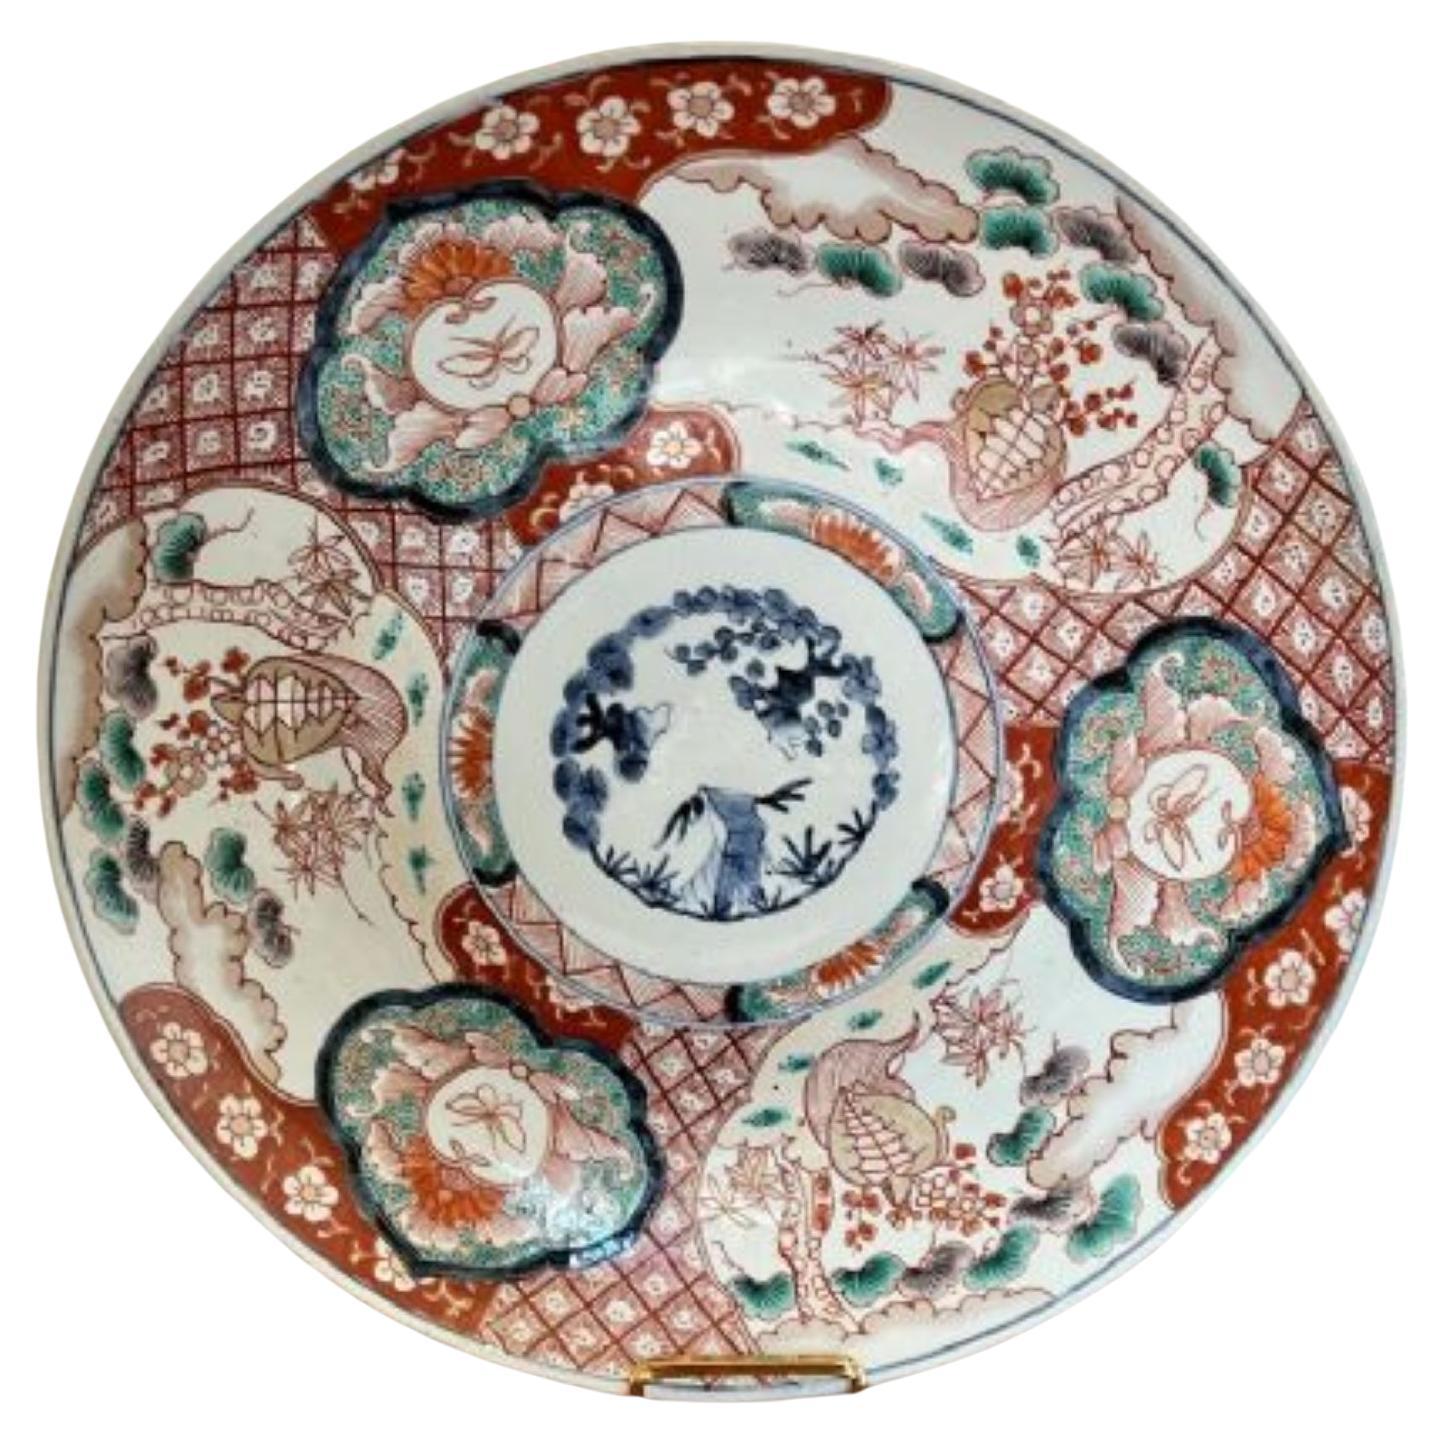 Quality antique Japanese Imari plate For Sale